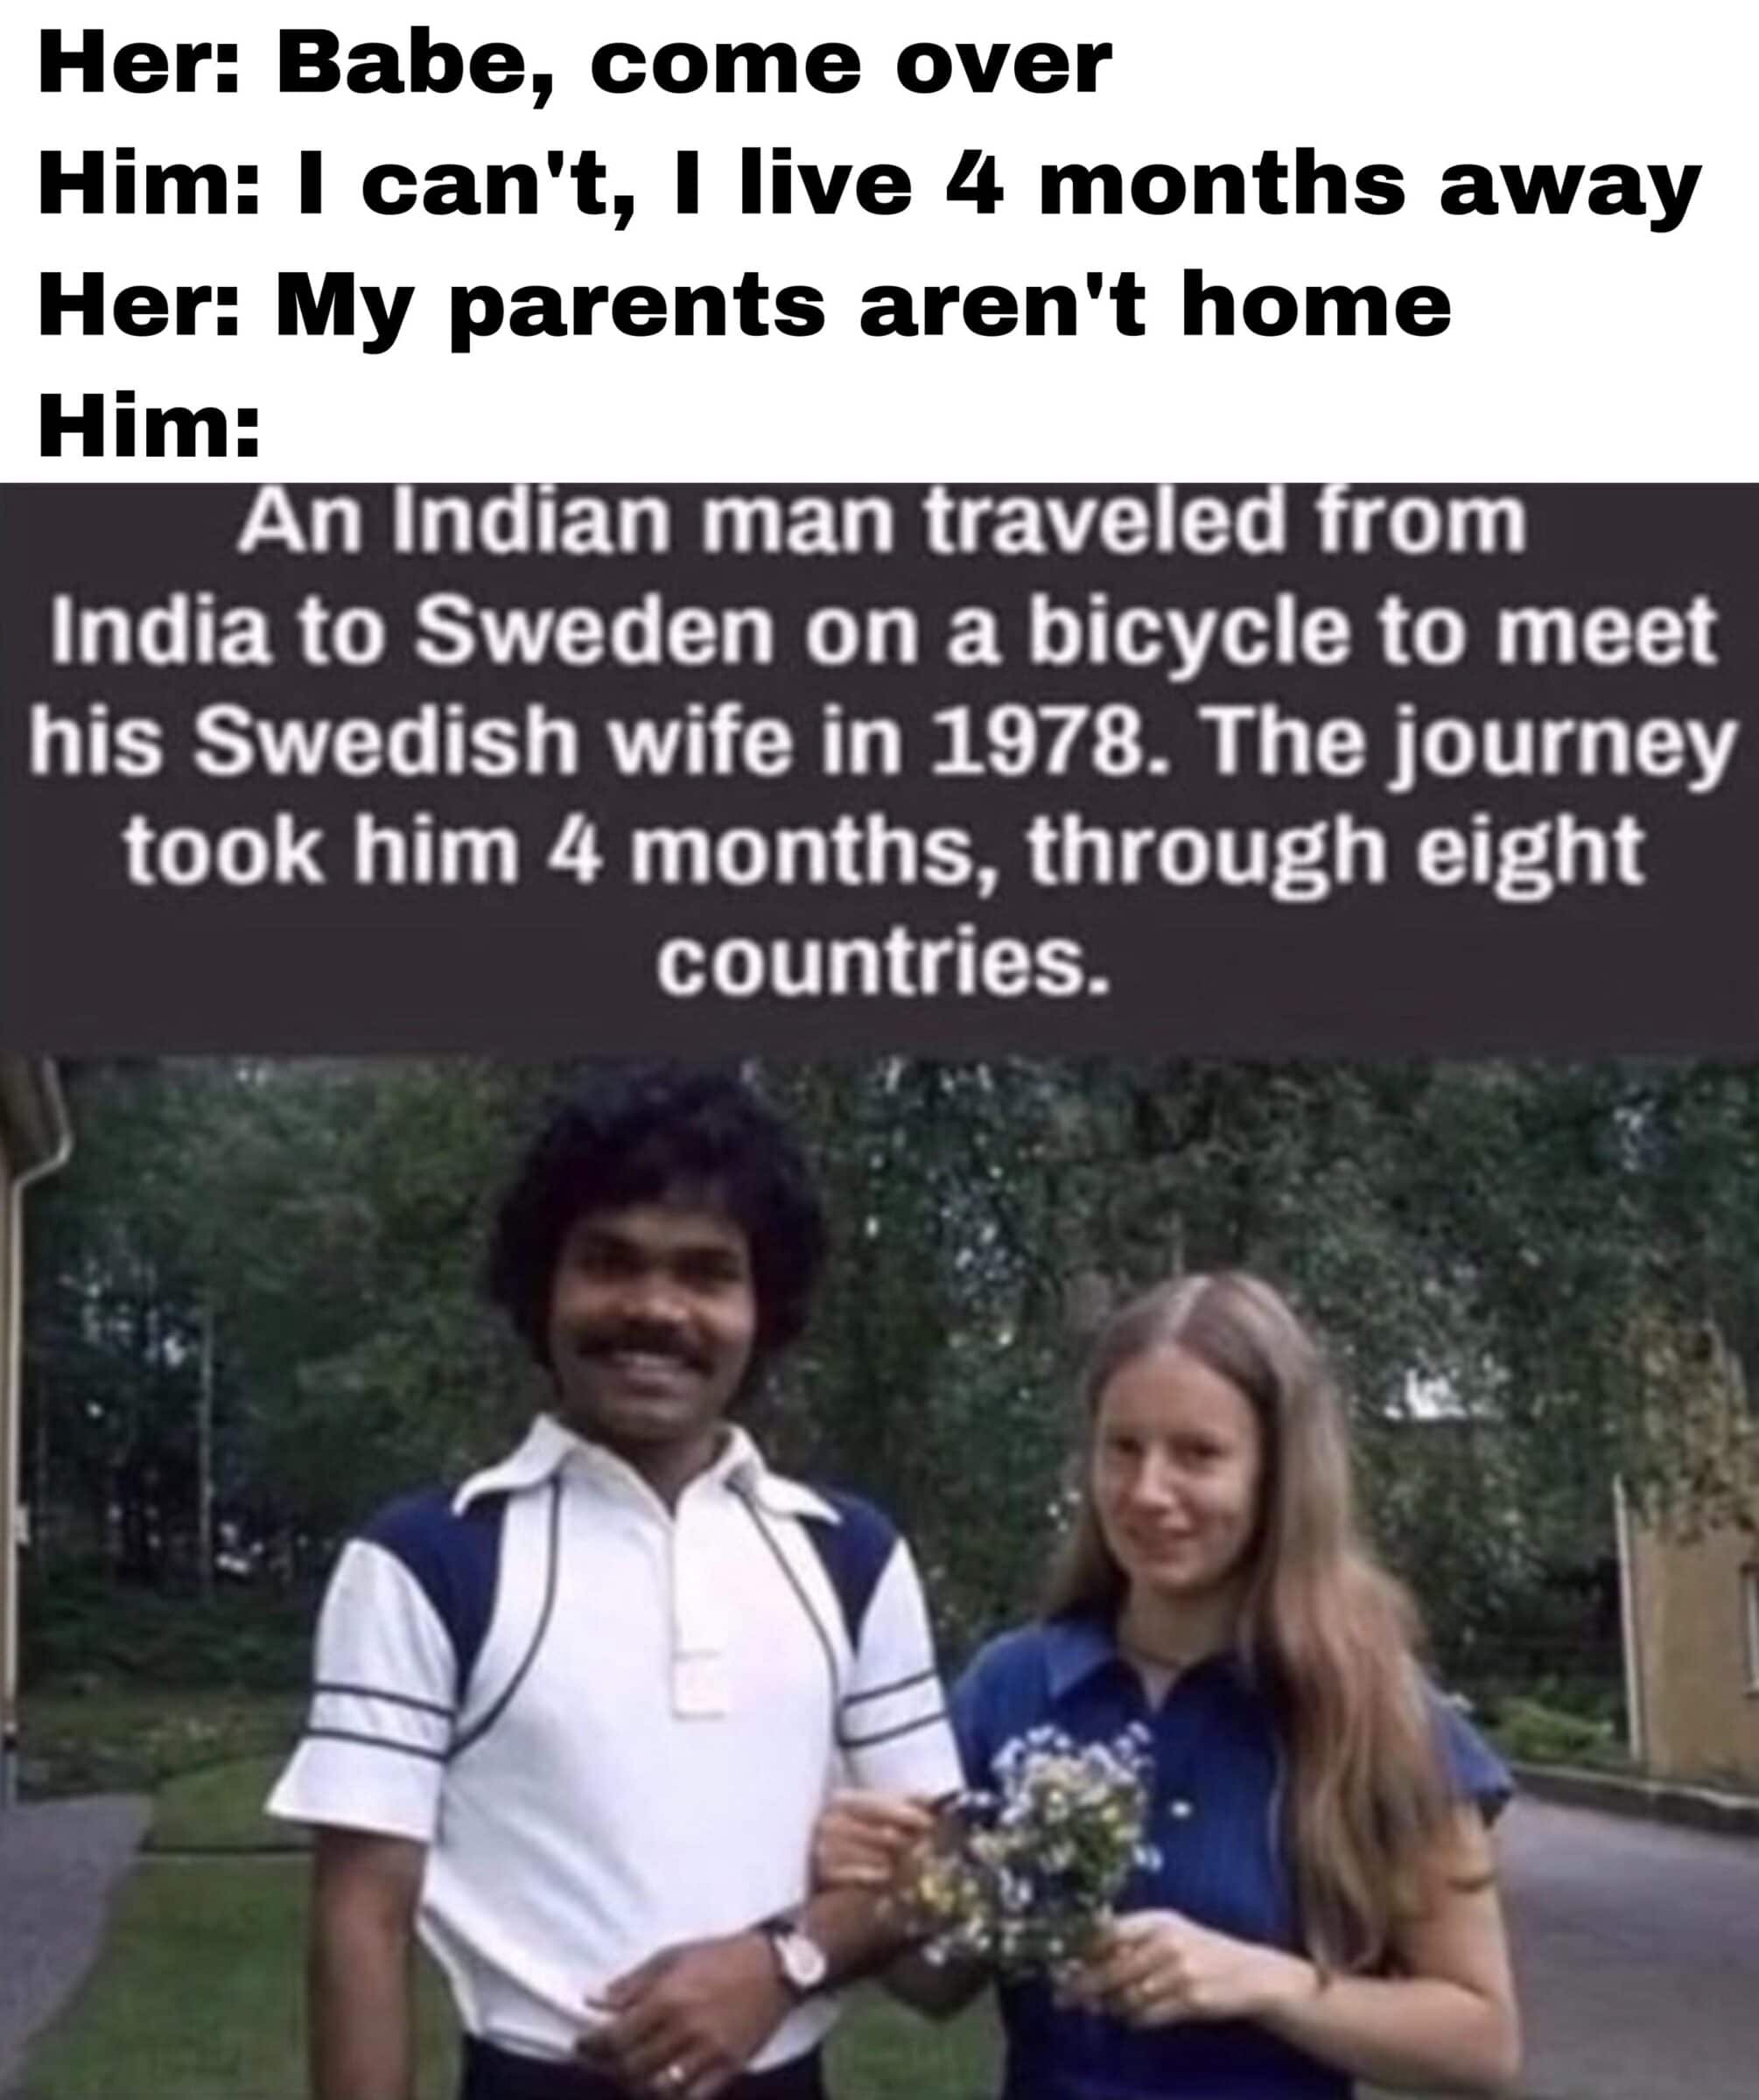 Dank, India, Sweden, Indian, Charlotte, Pradyumna Dank Memes Dank, India, Sweden, Indian, Charlotte, Pradyumna text: Babe, come over Him. • I can't, I live 4 months away My parents aren't home Him: An Indian man traveled from India to Sweden on a bicycle to meet his Swedish wife in 1978. The journey took him 4 months, through eight countries. 